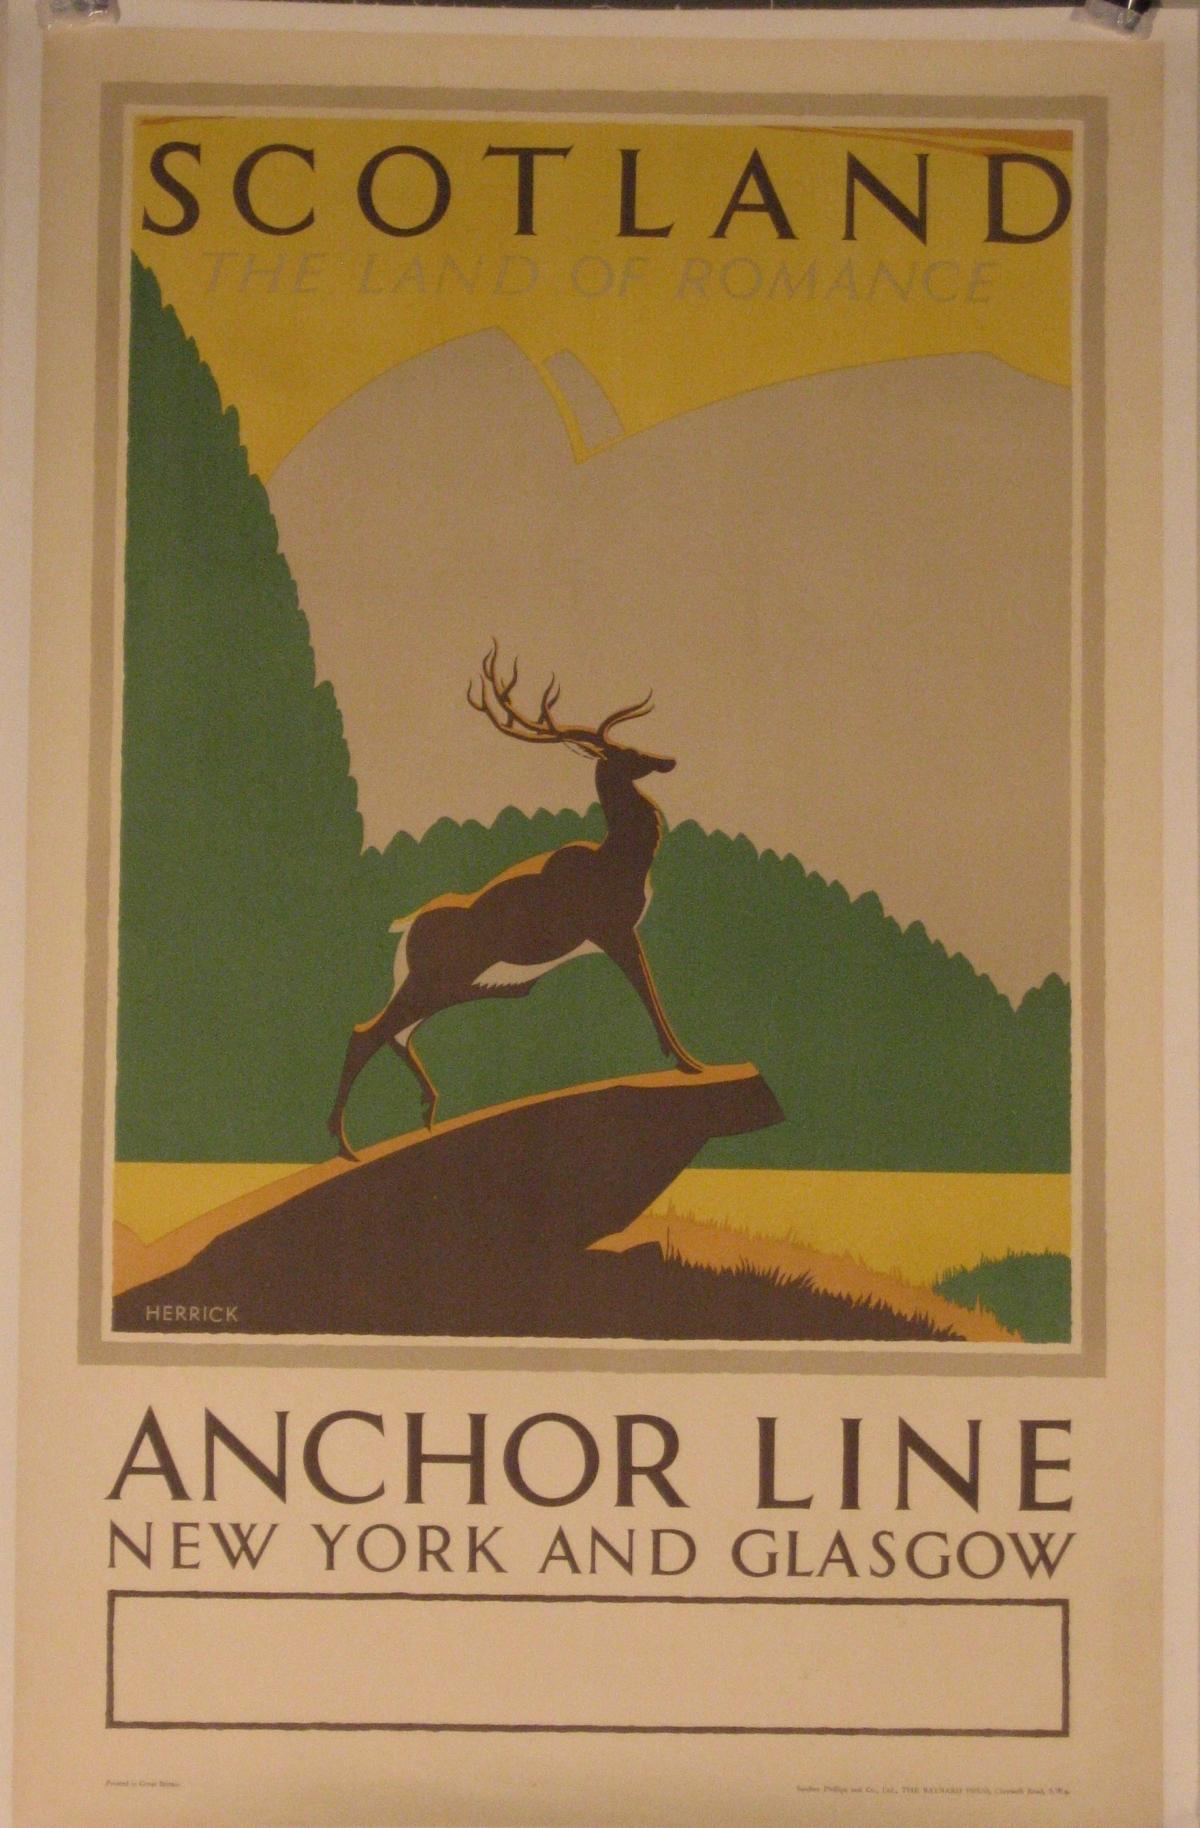 Artist: Frederick Charles Herrick  (British, 1887 –1970)

Date of Origin: circa 1930

Medium: Original Stone Lithograph Vintage Poster

Size: 27” x 41”

 

Original vintage travel poster for Scotland The Land of Romance issued by Anchor Line New